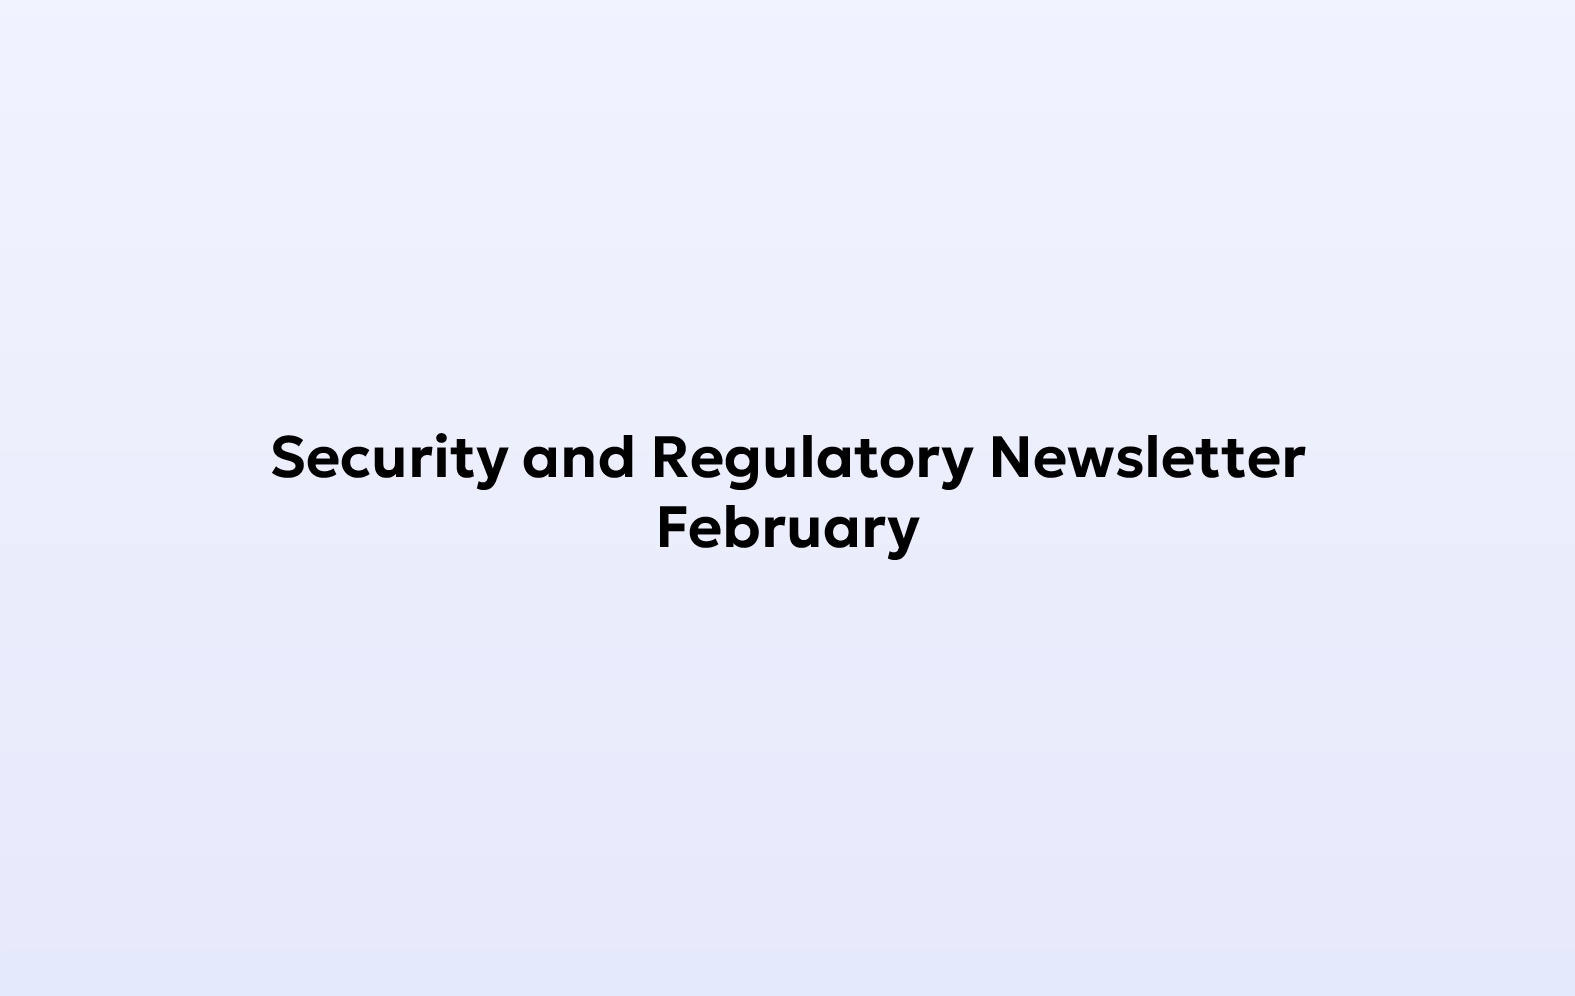 Security and Regulatory Newsletter - February